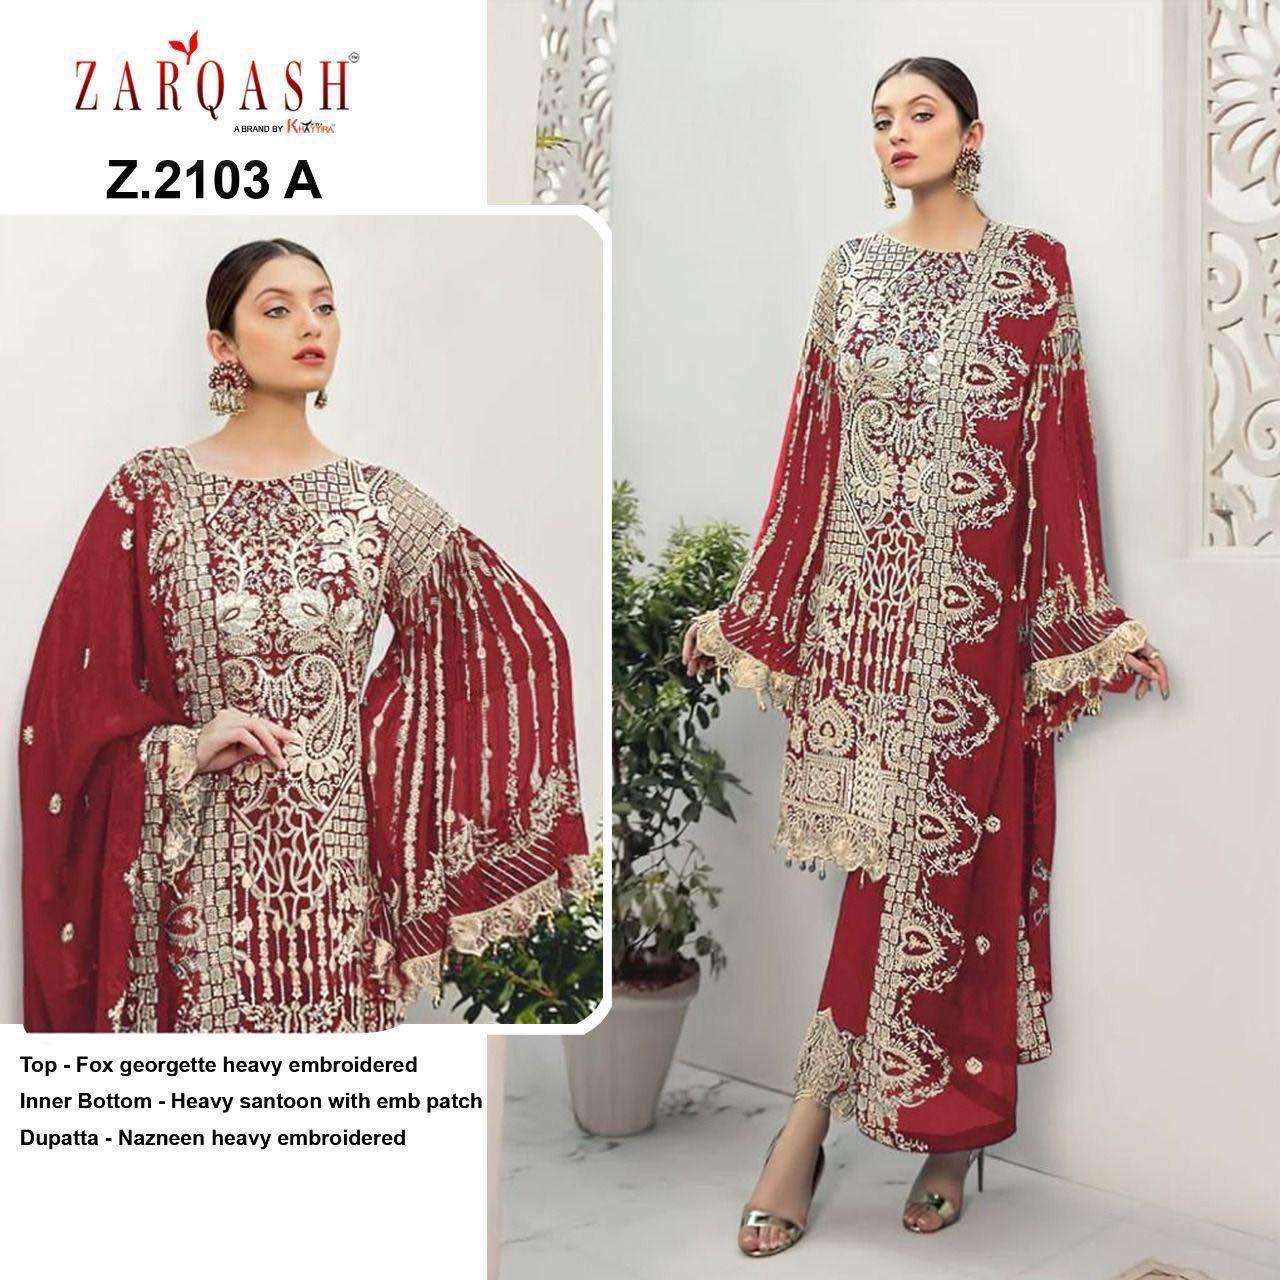 zarqash catalogue rangoon design number 2103 fox georgette heavy embroidered pakistani suits collection 